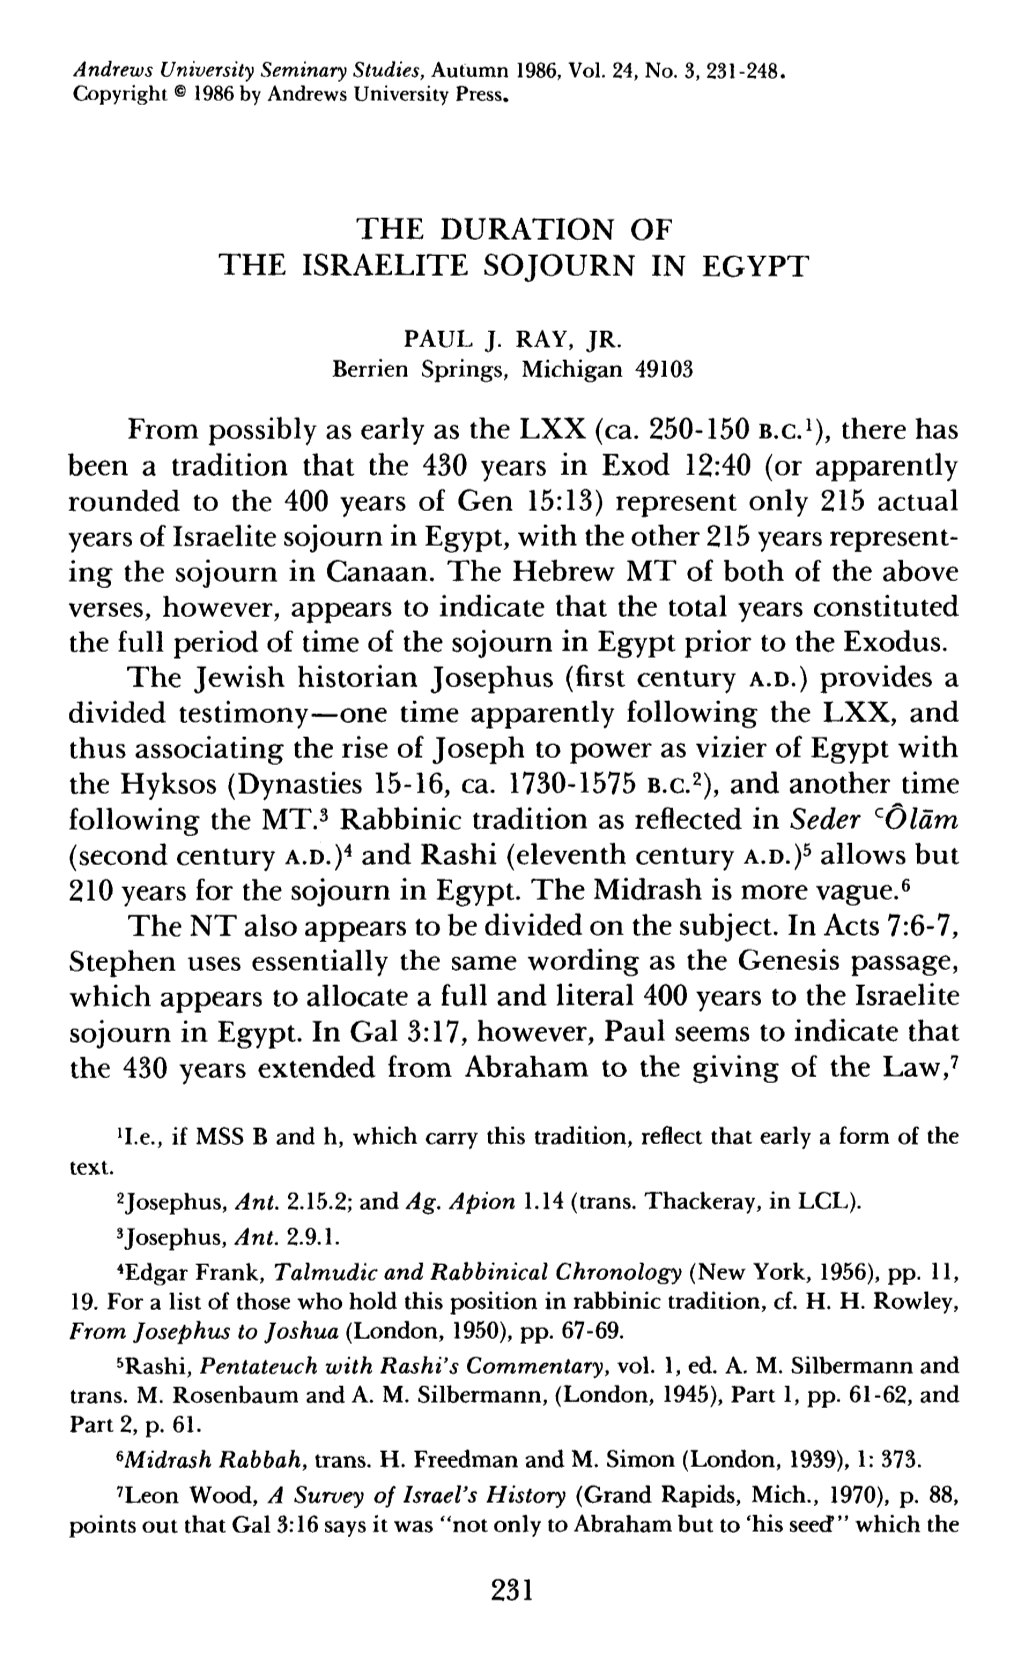 The Duration of the Israelite Sojourn in Egypt